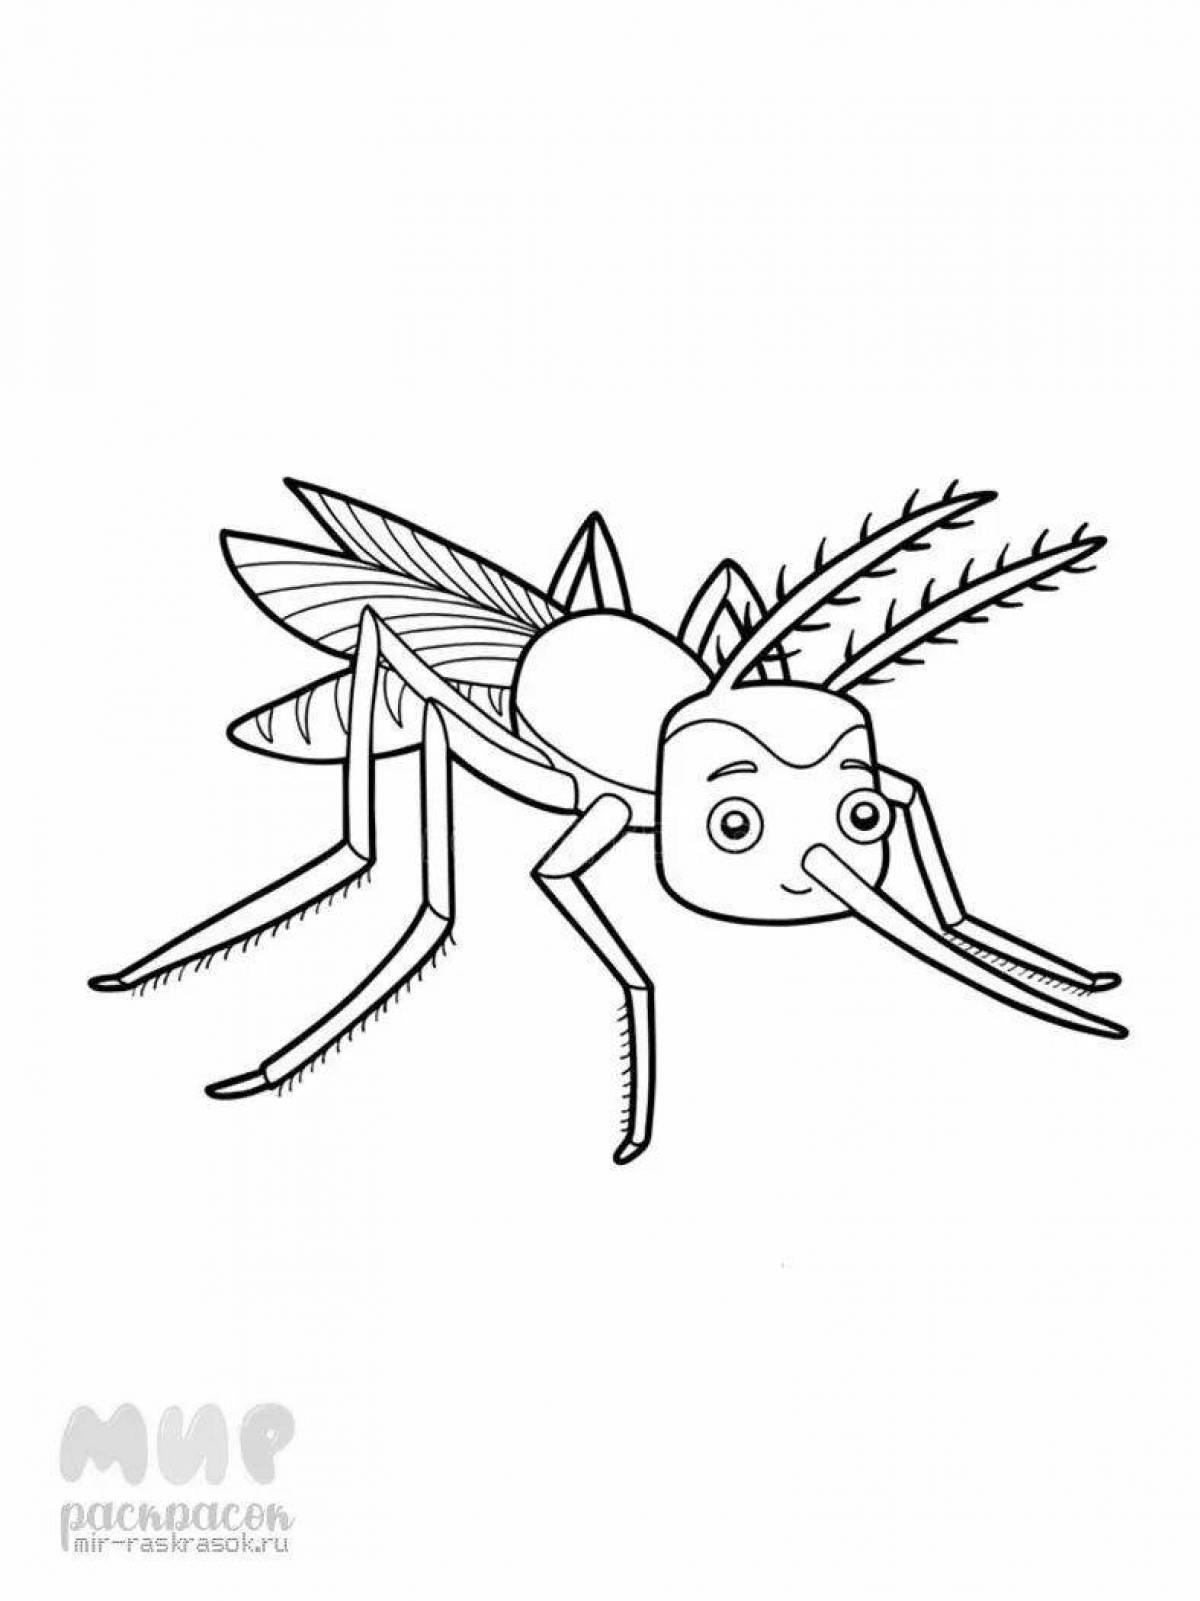 Interesting mosquito coloring page